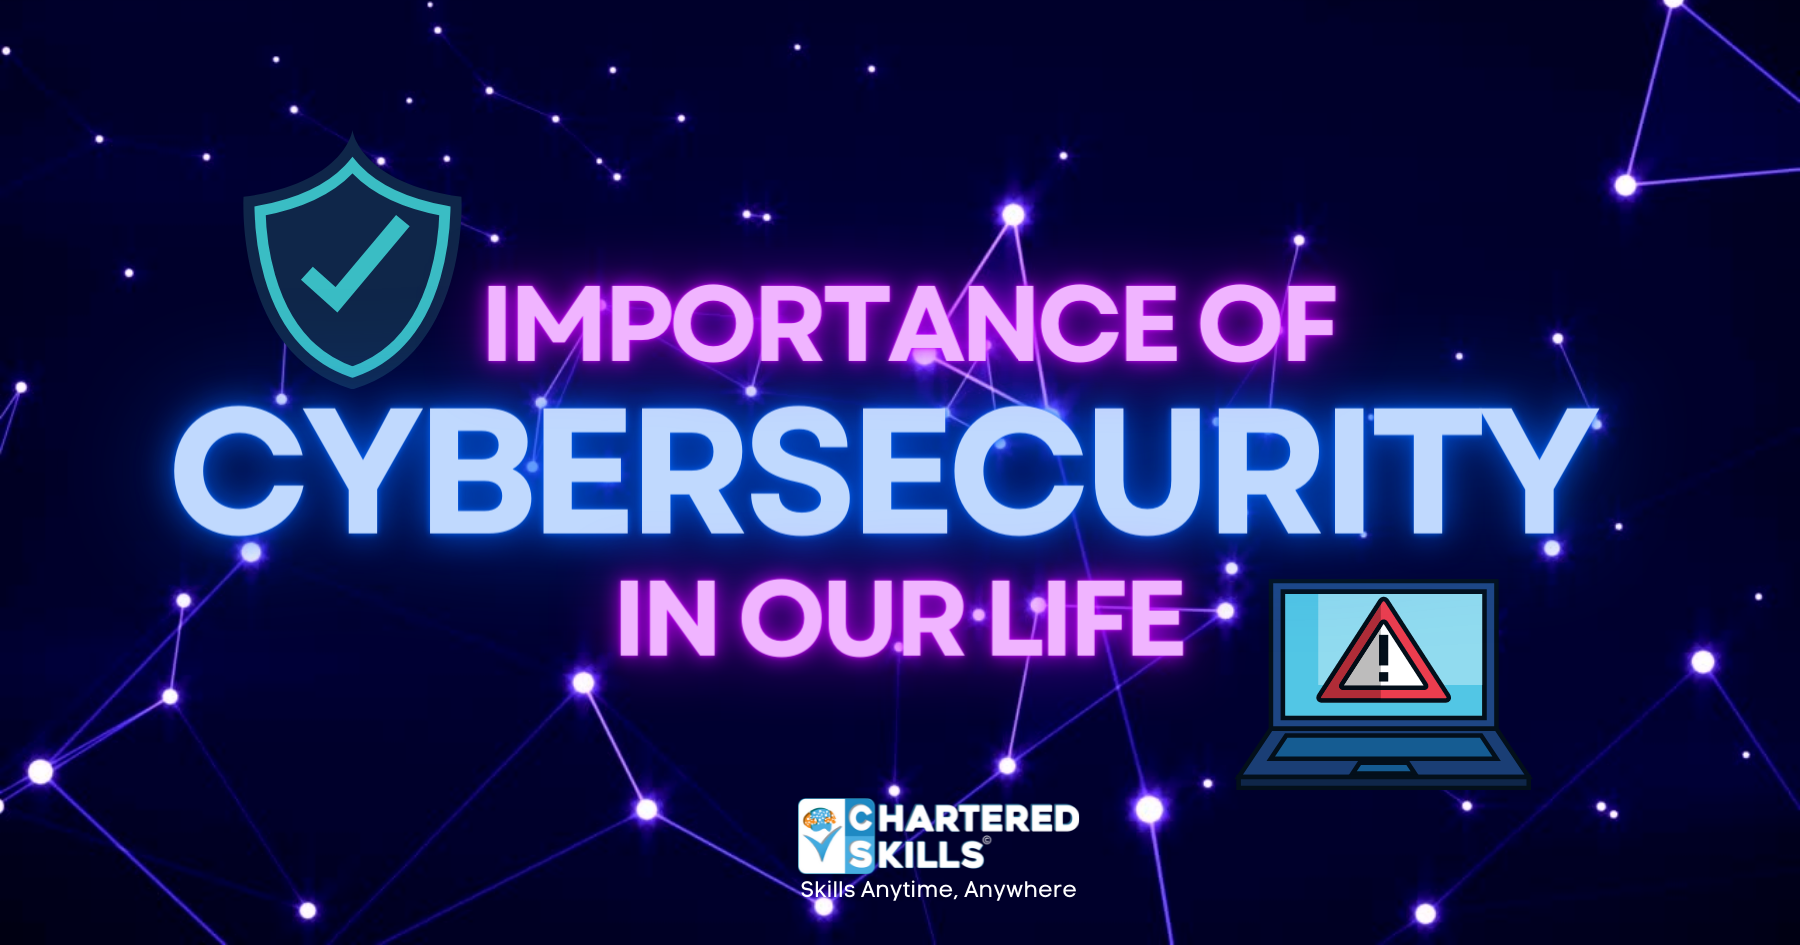 Importance of Cybersecurity in our life